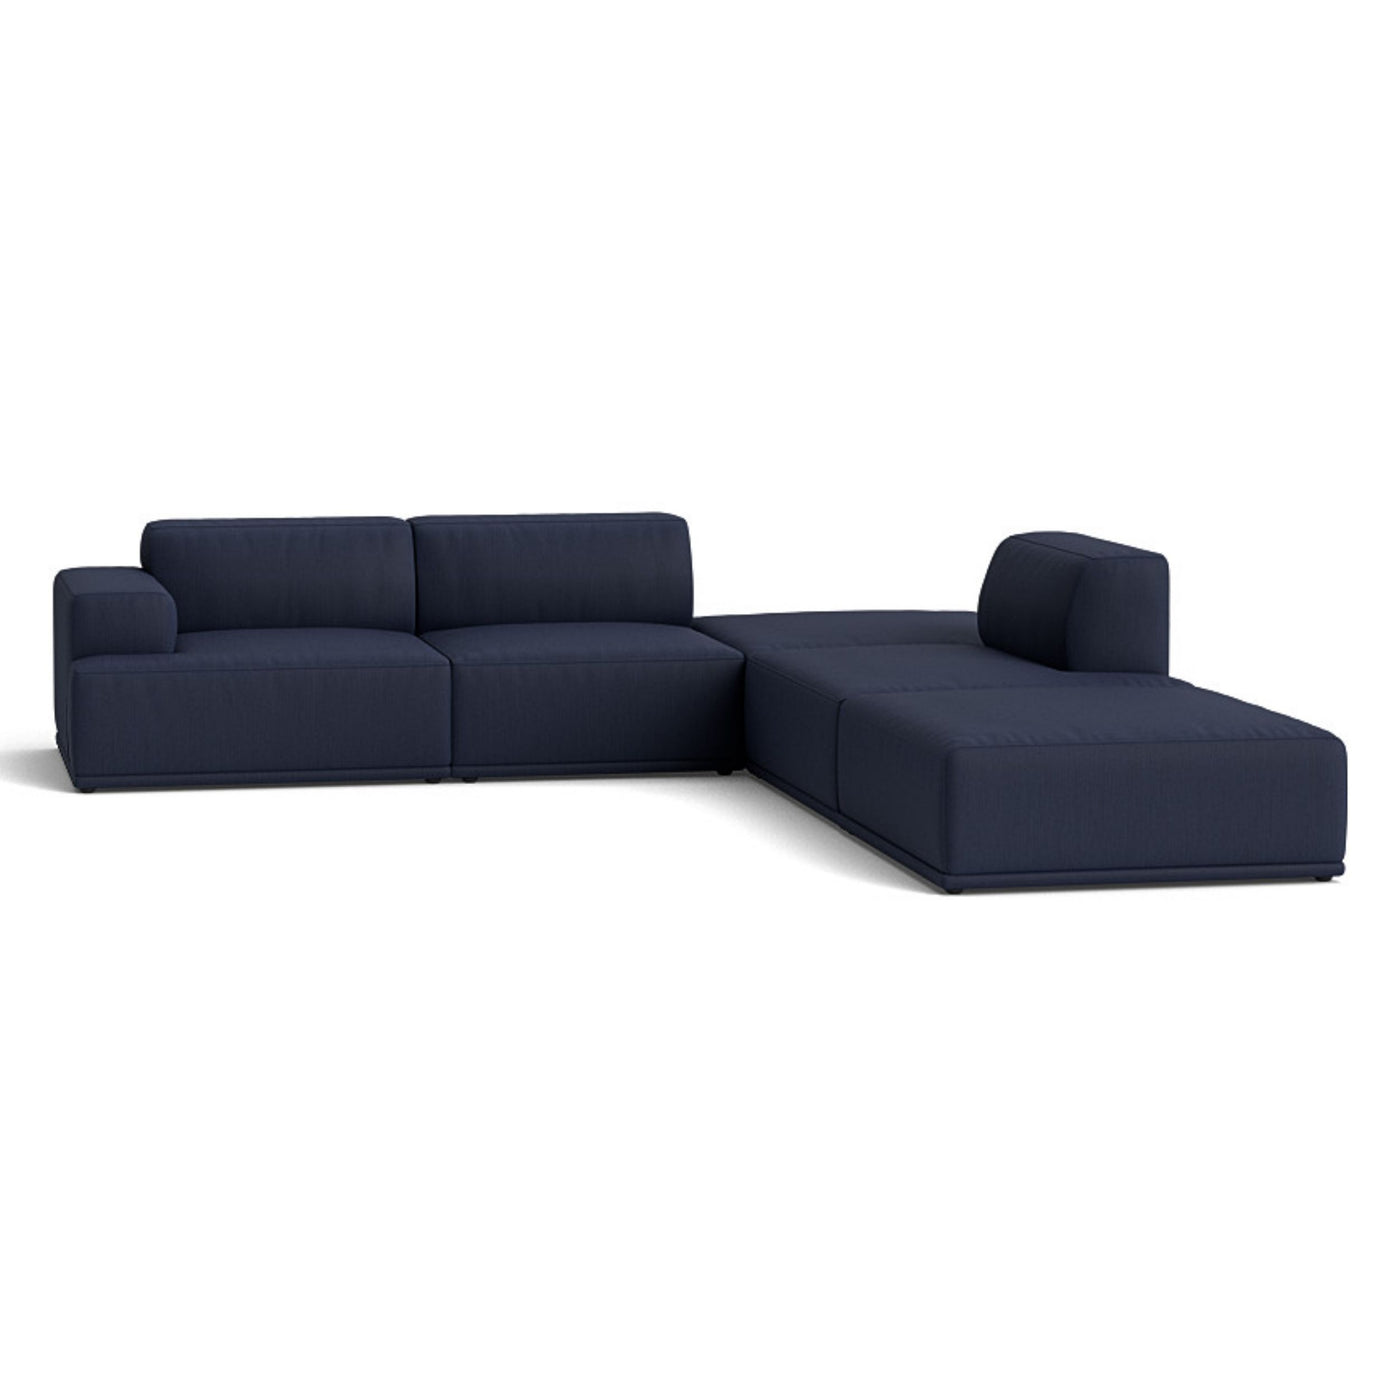 Muuto Connect Soft Modular Corner Sofa, configuration 3. made-to-order from someday designs. #colour_balder-782